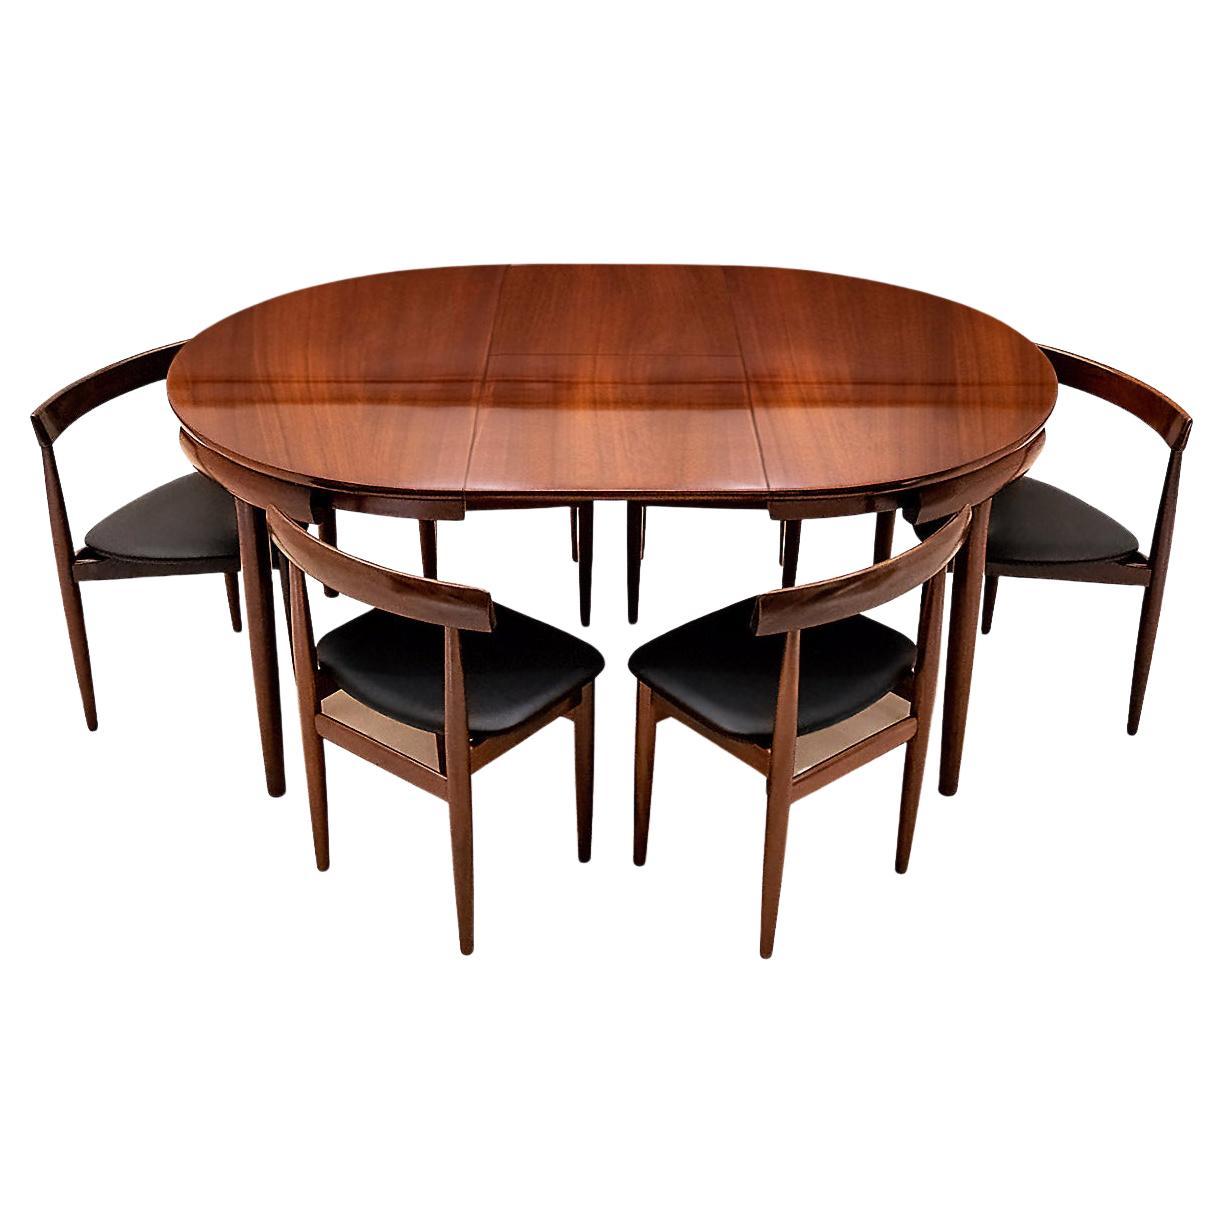 Danish Mid Century Hans Olsen Roundette Dining Set with 6 Chairs by Frem Røjle